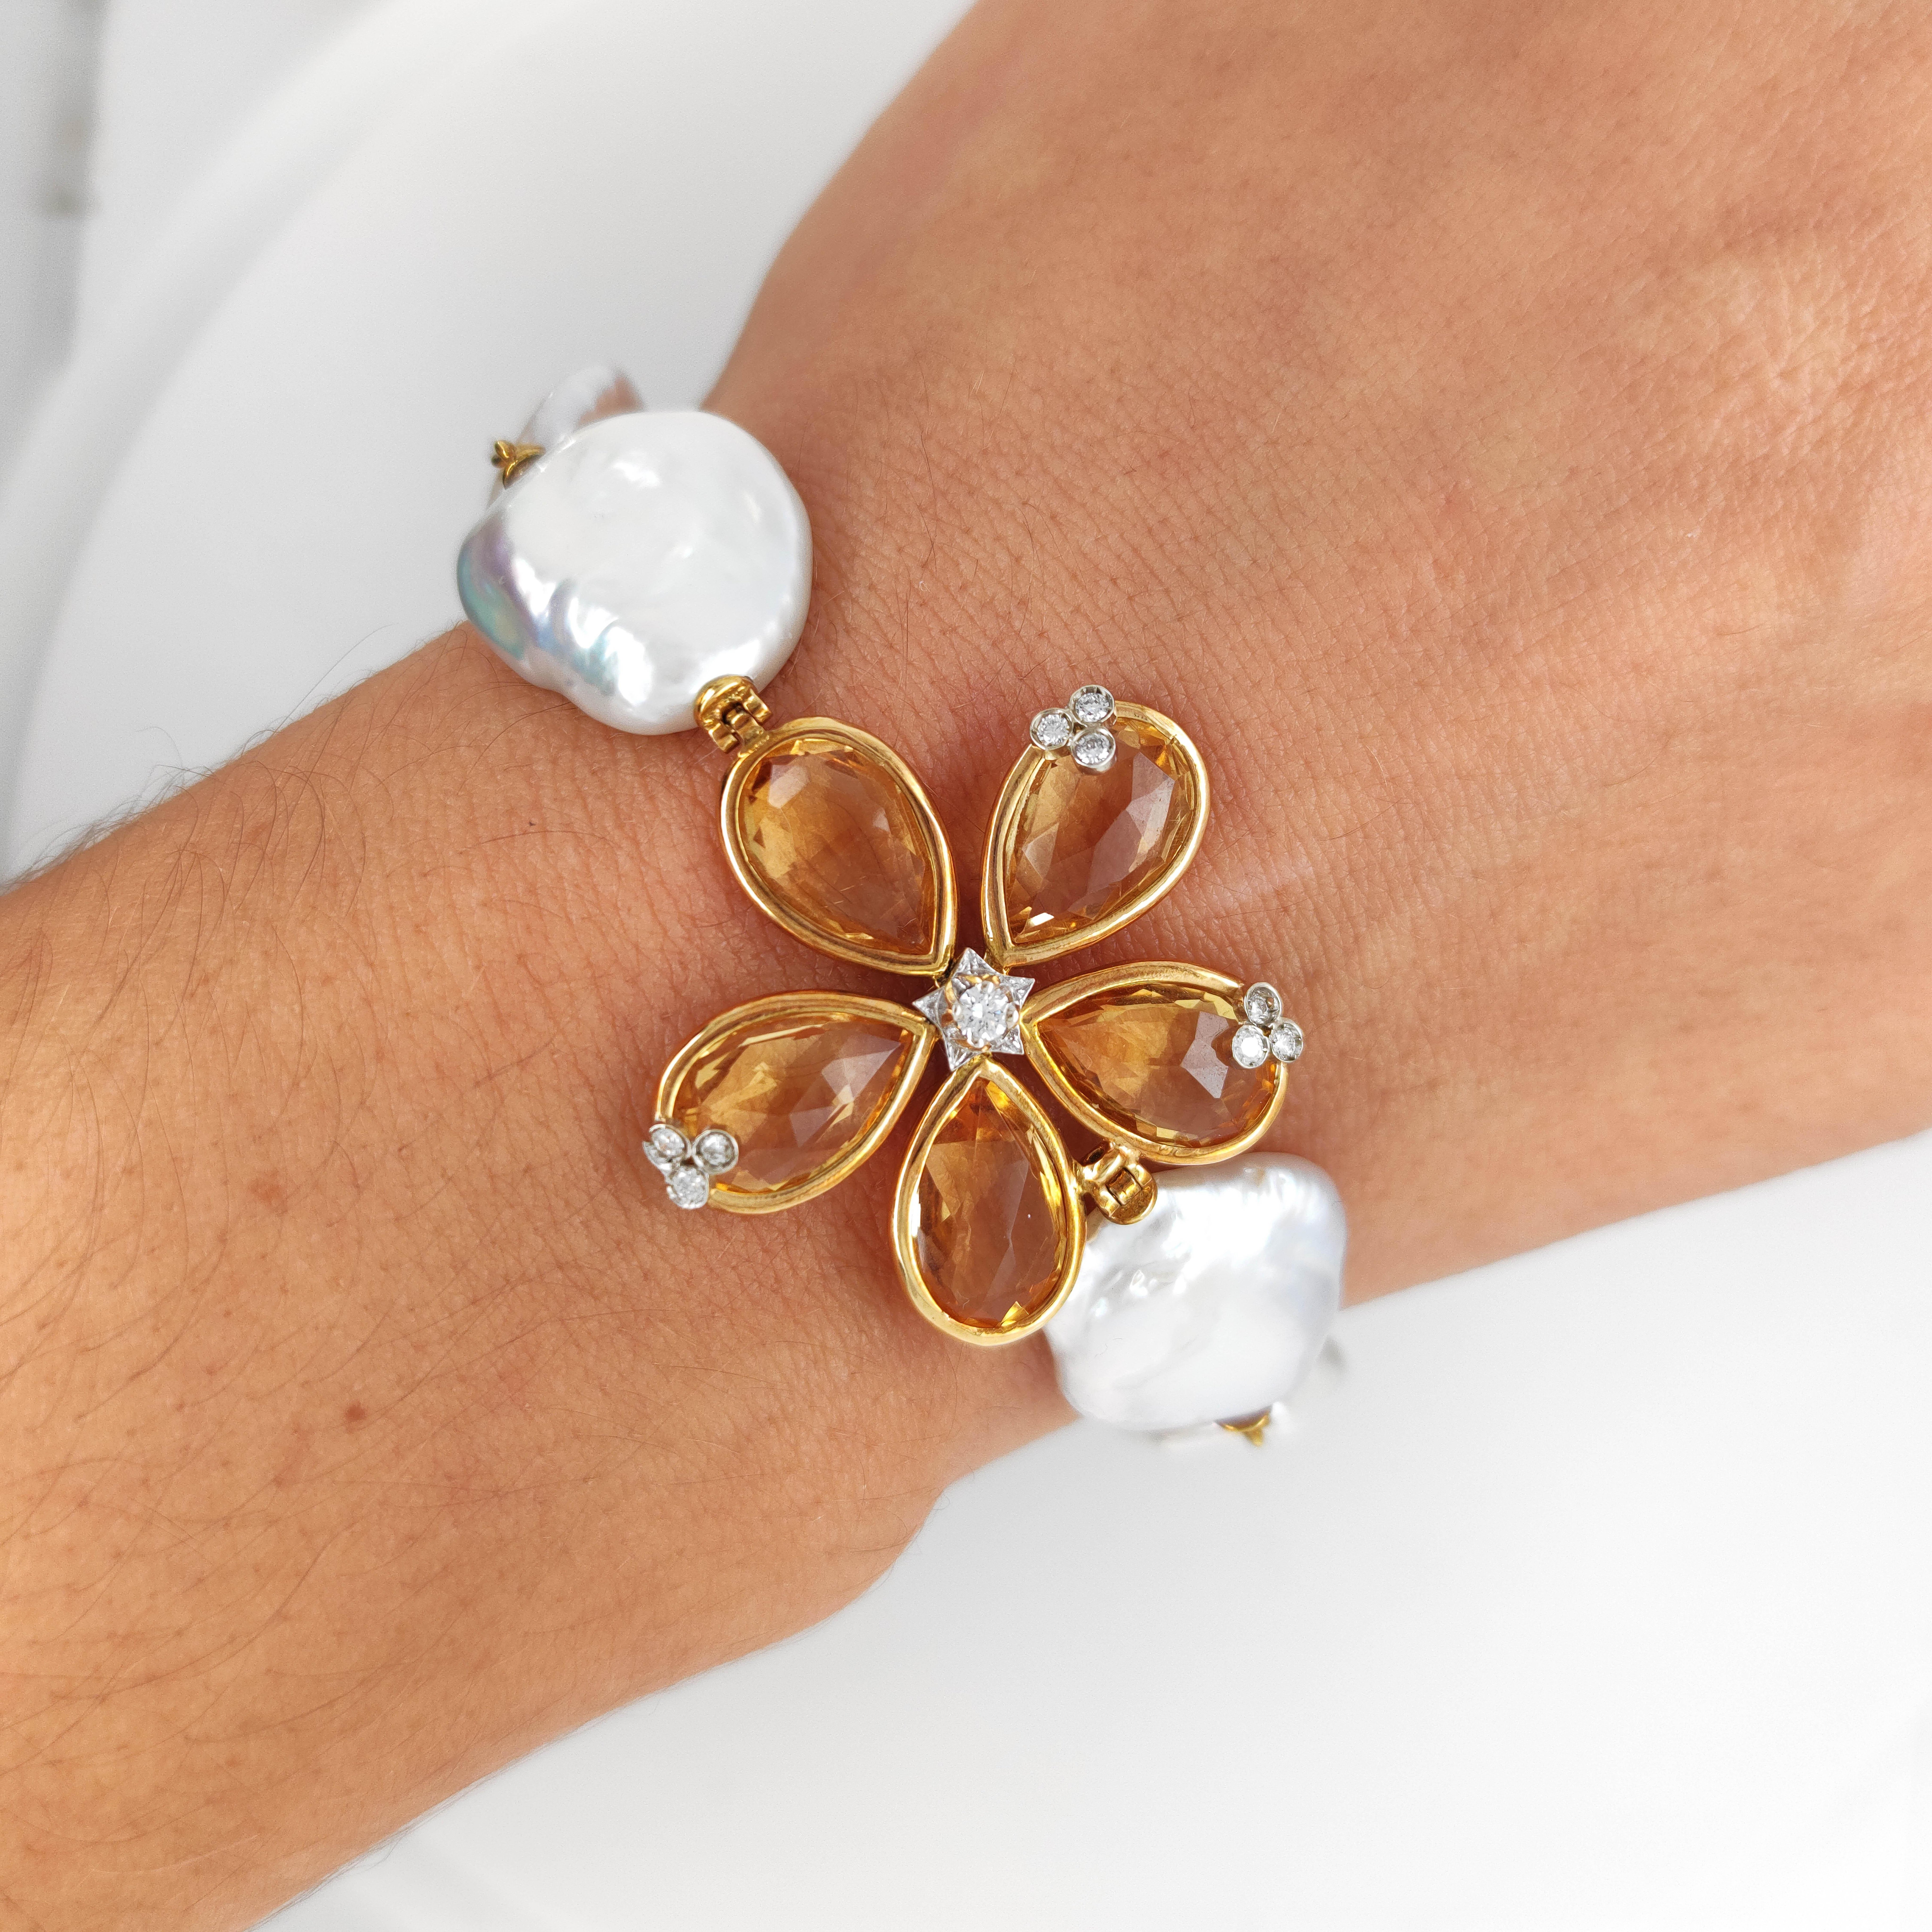 Elevate your style with our exquisite 18kt Yellow Gold Bracelet, a mesmerizing fusion of luxury and nature. The centerpiece features a radiant flower crafted from Citrine quartz, exuding warmth and positive energy. Surrounding the bloom are lustrous